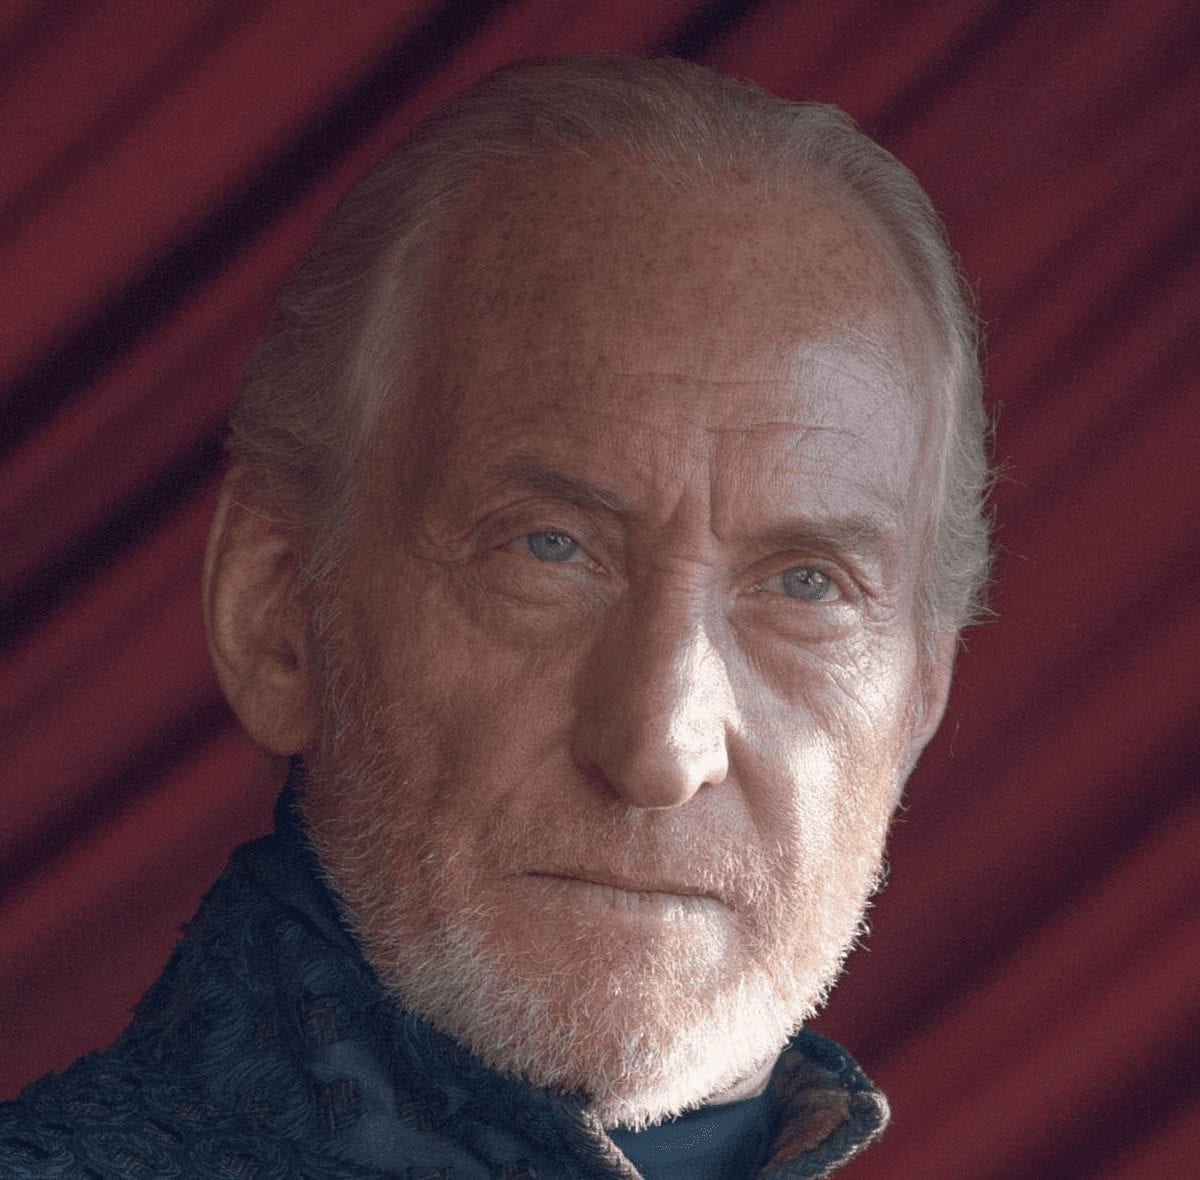 Game of Thrones Tywin Lannister